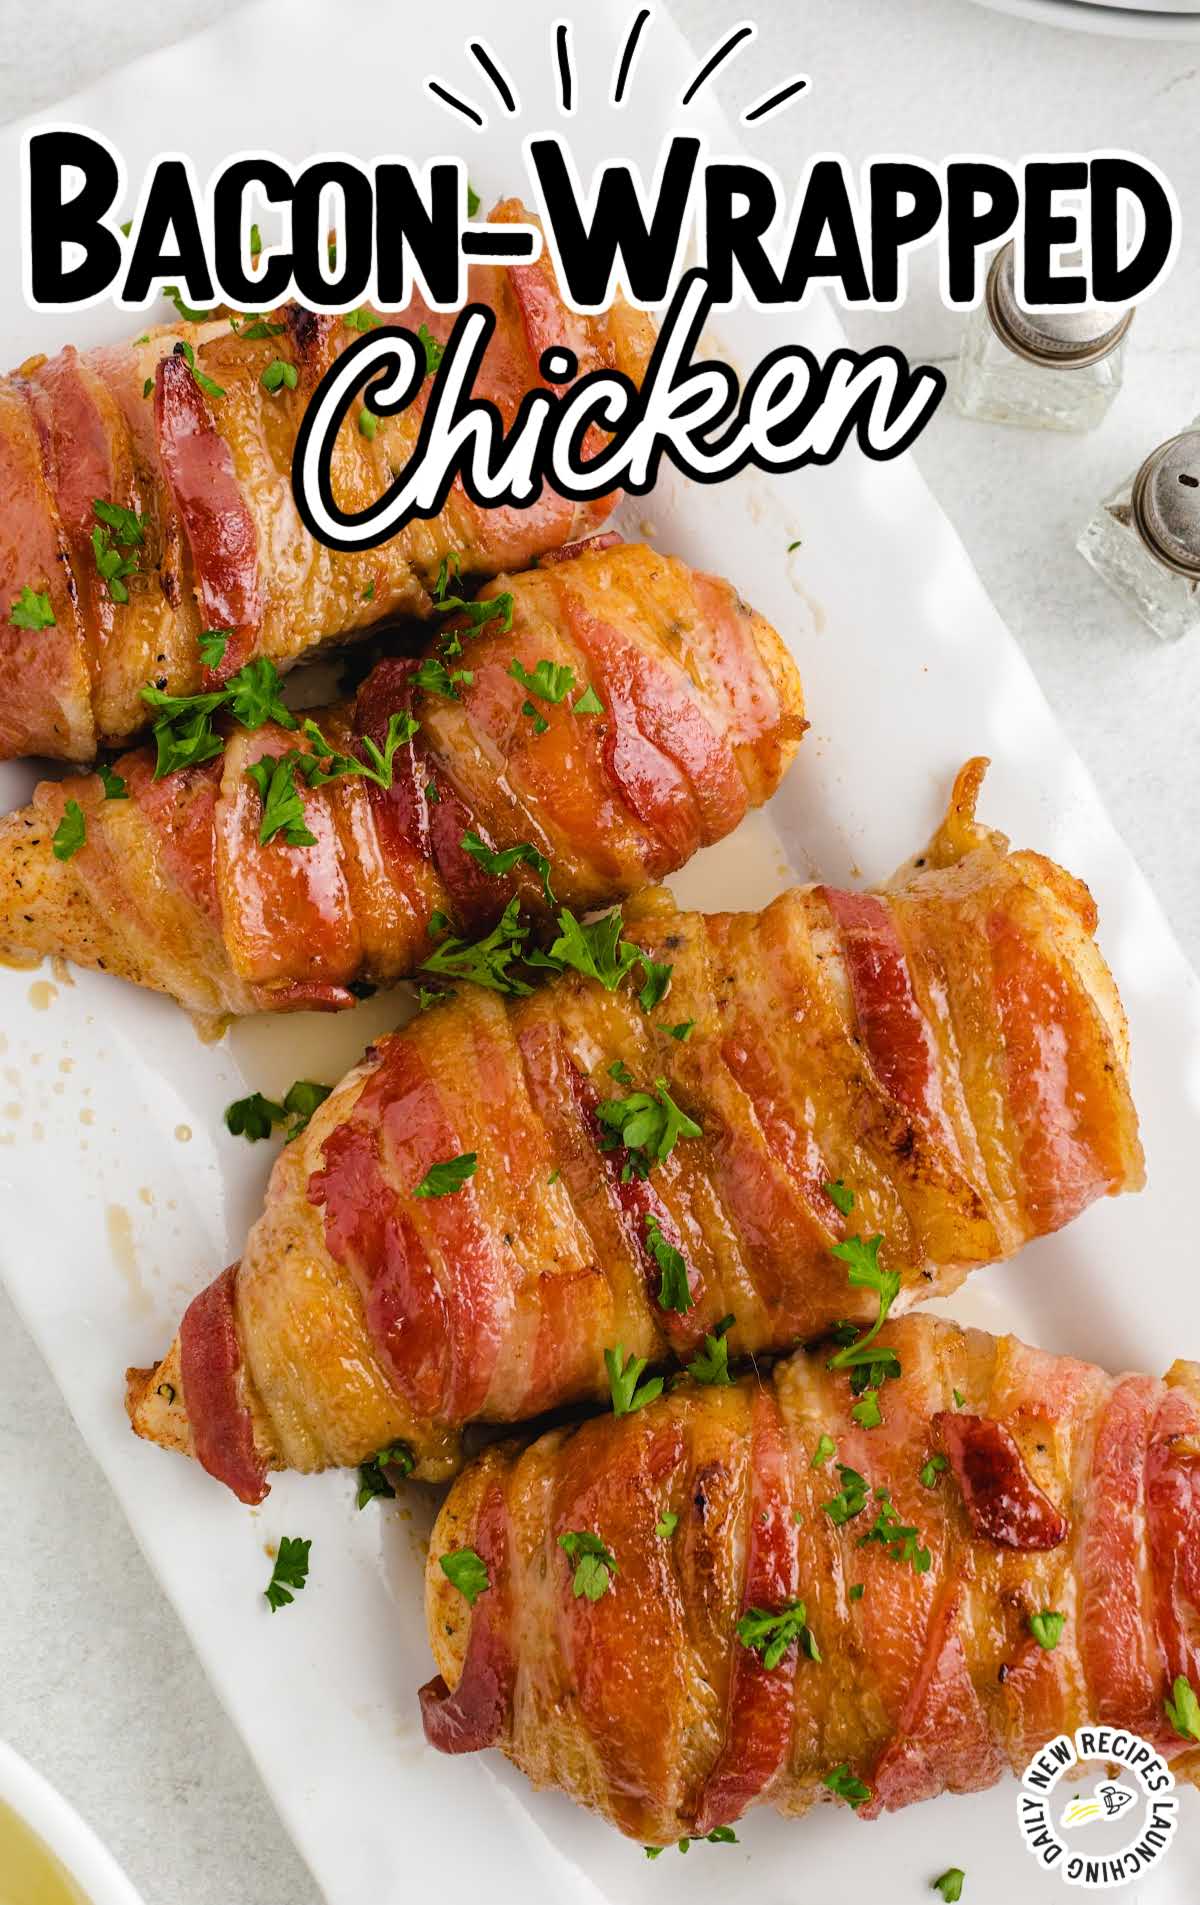 overhead shot of a serving tray of Bacon-Wrapped Chicken garnished with parsley